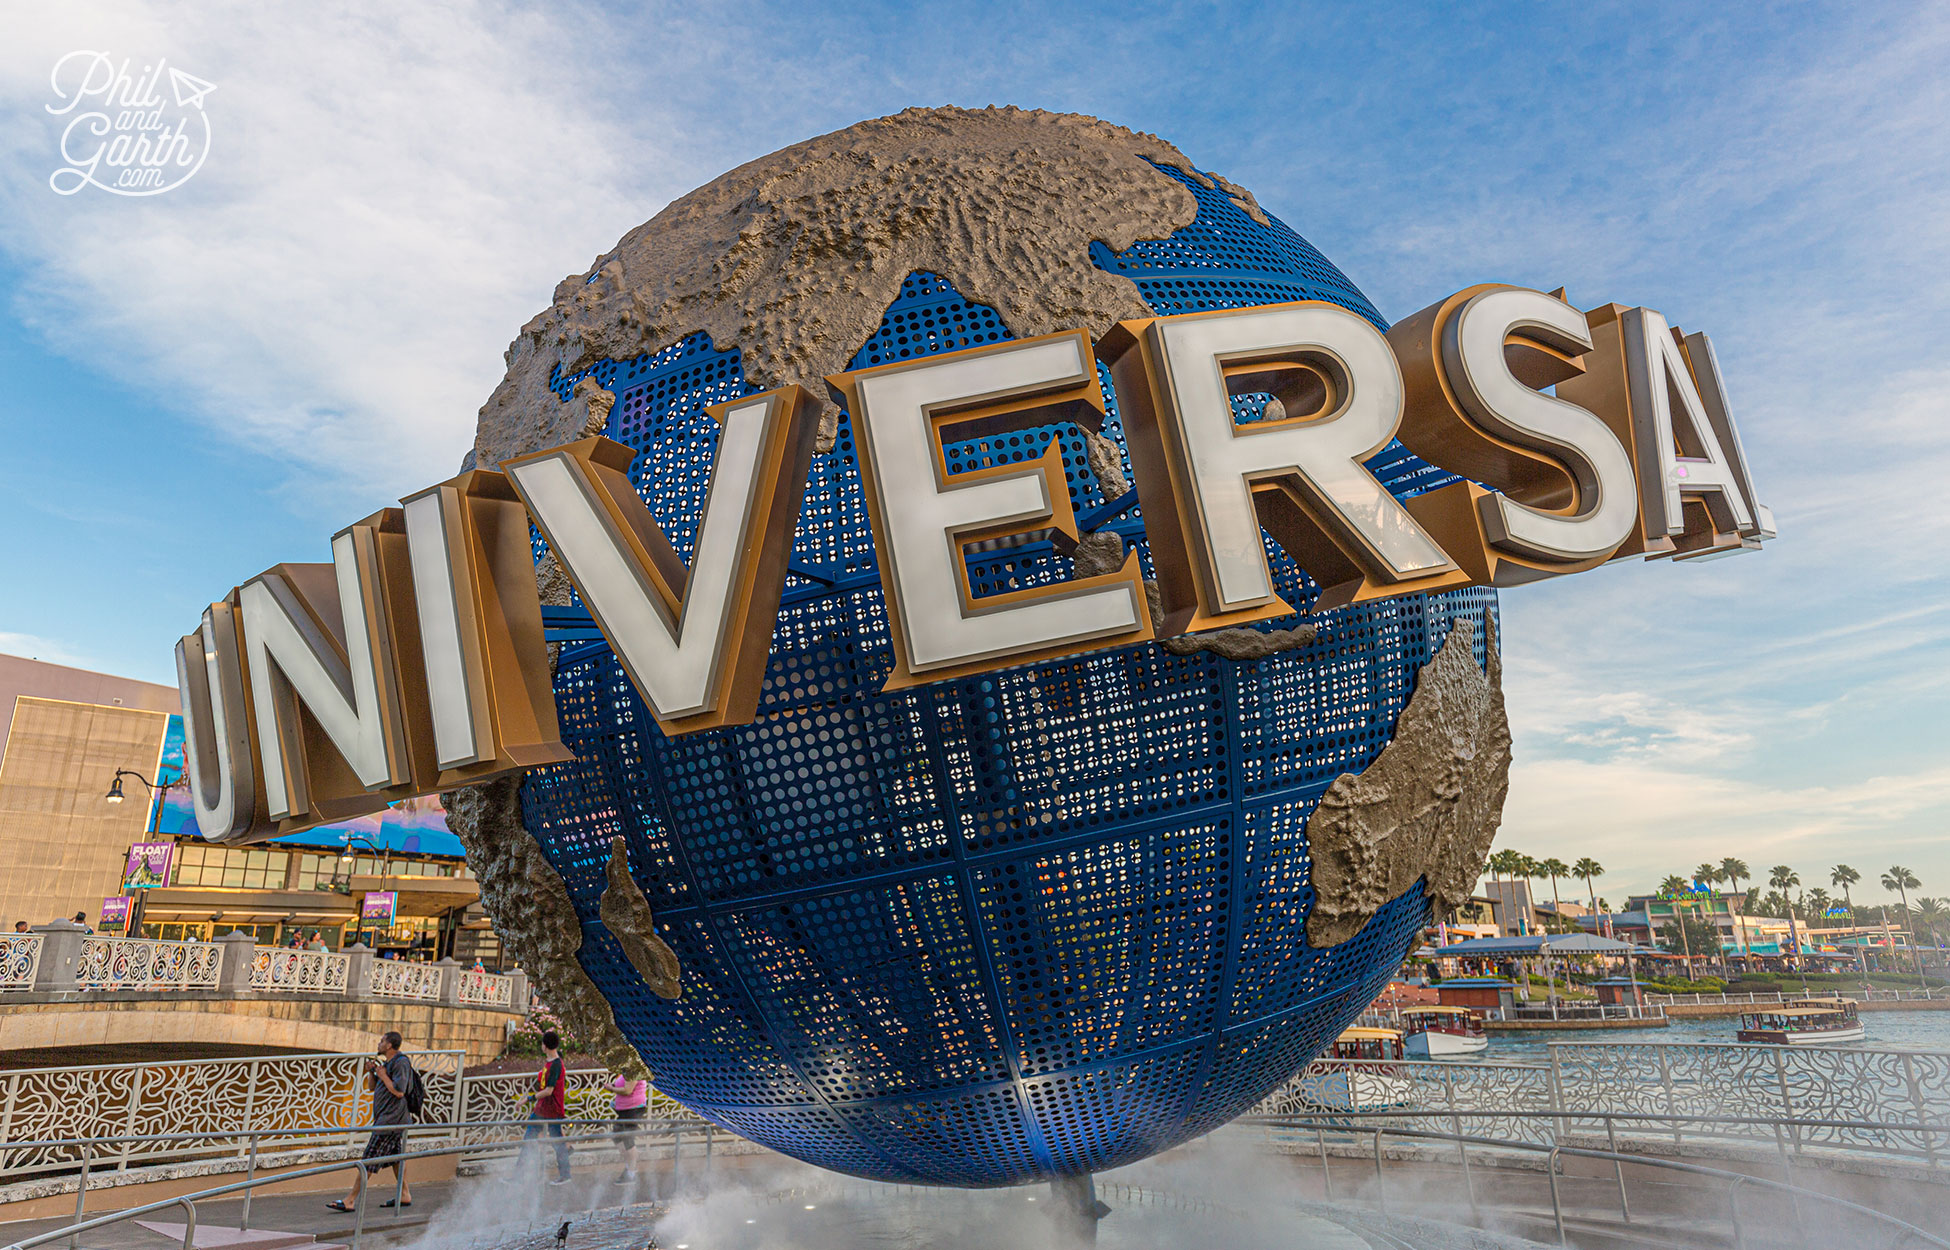 The iconic Universal logo outside the parks next to Universal CityWalk